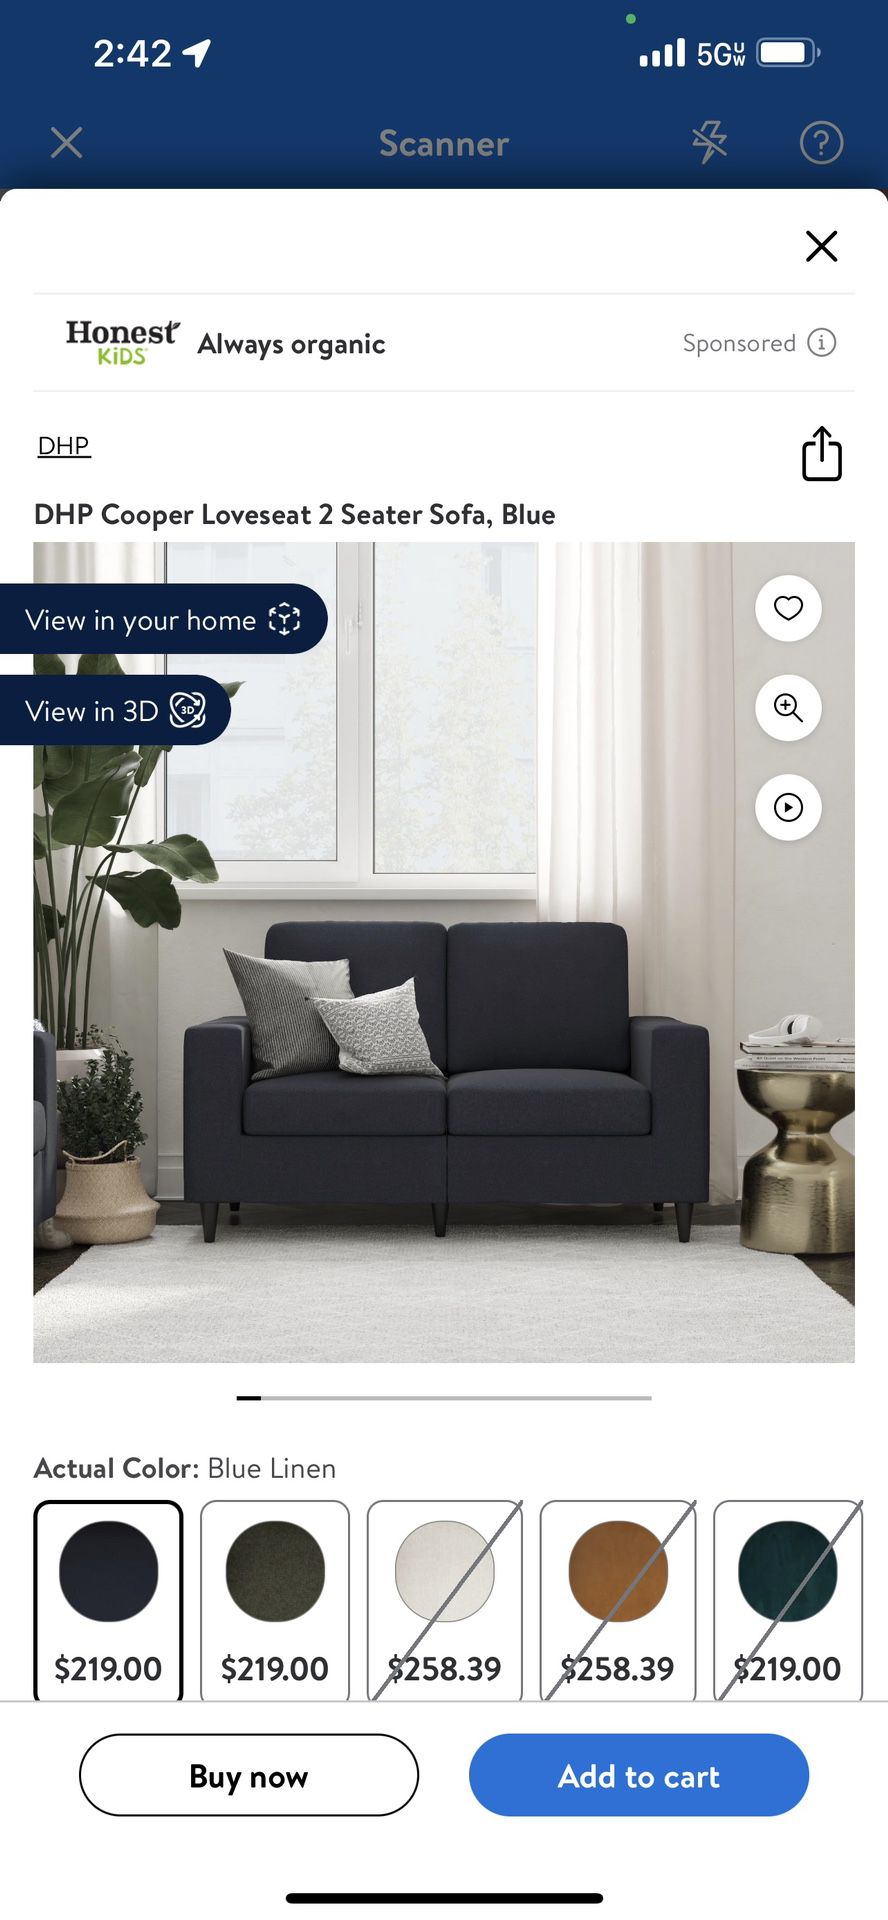 DHP Cooper Loveseat 2 Seater Sofa, Blue Pm if interested 